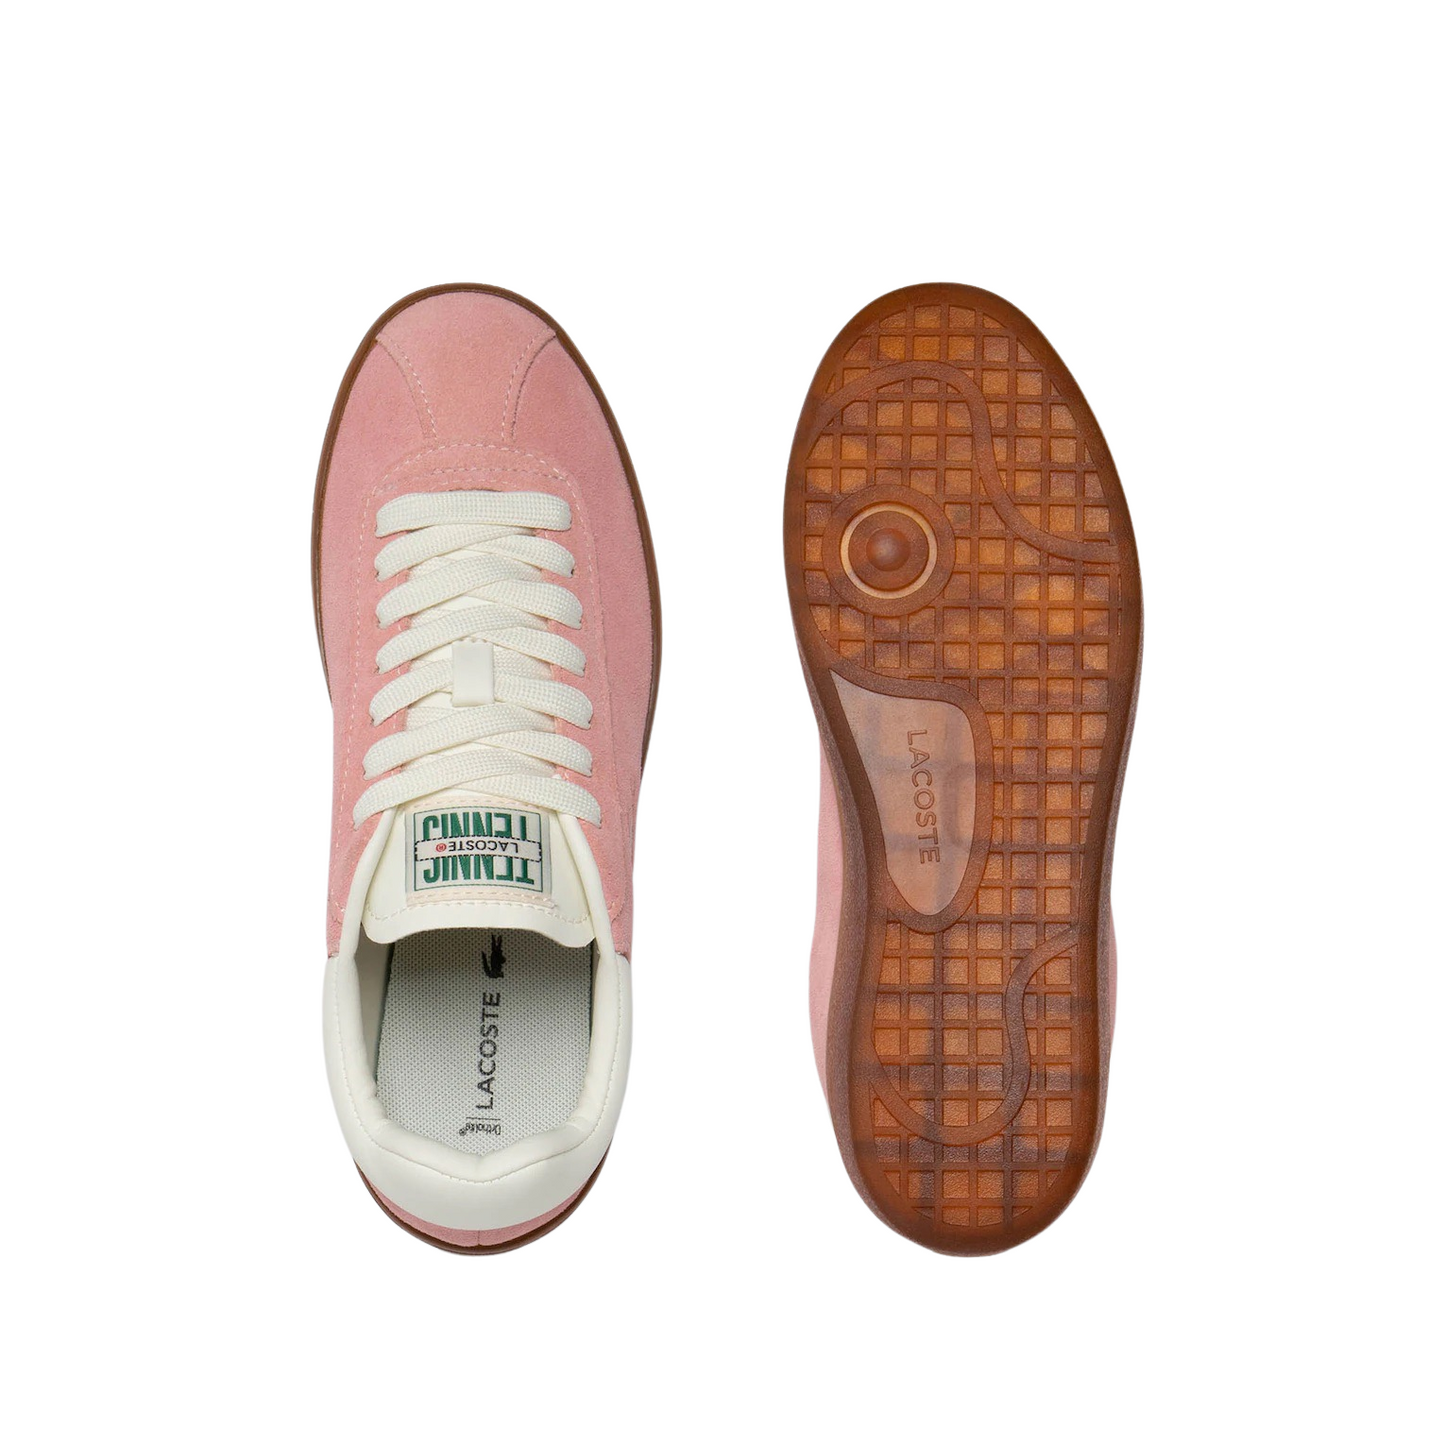 Women's Lacoste Baseshot Pink Gum Sneakers